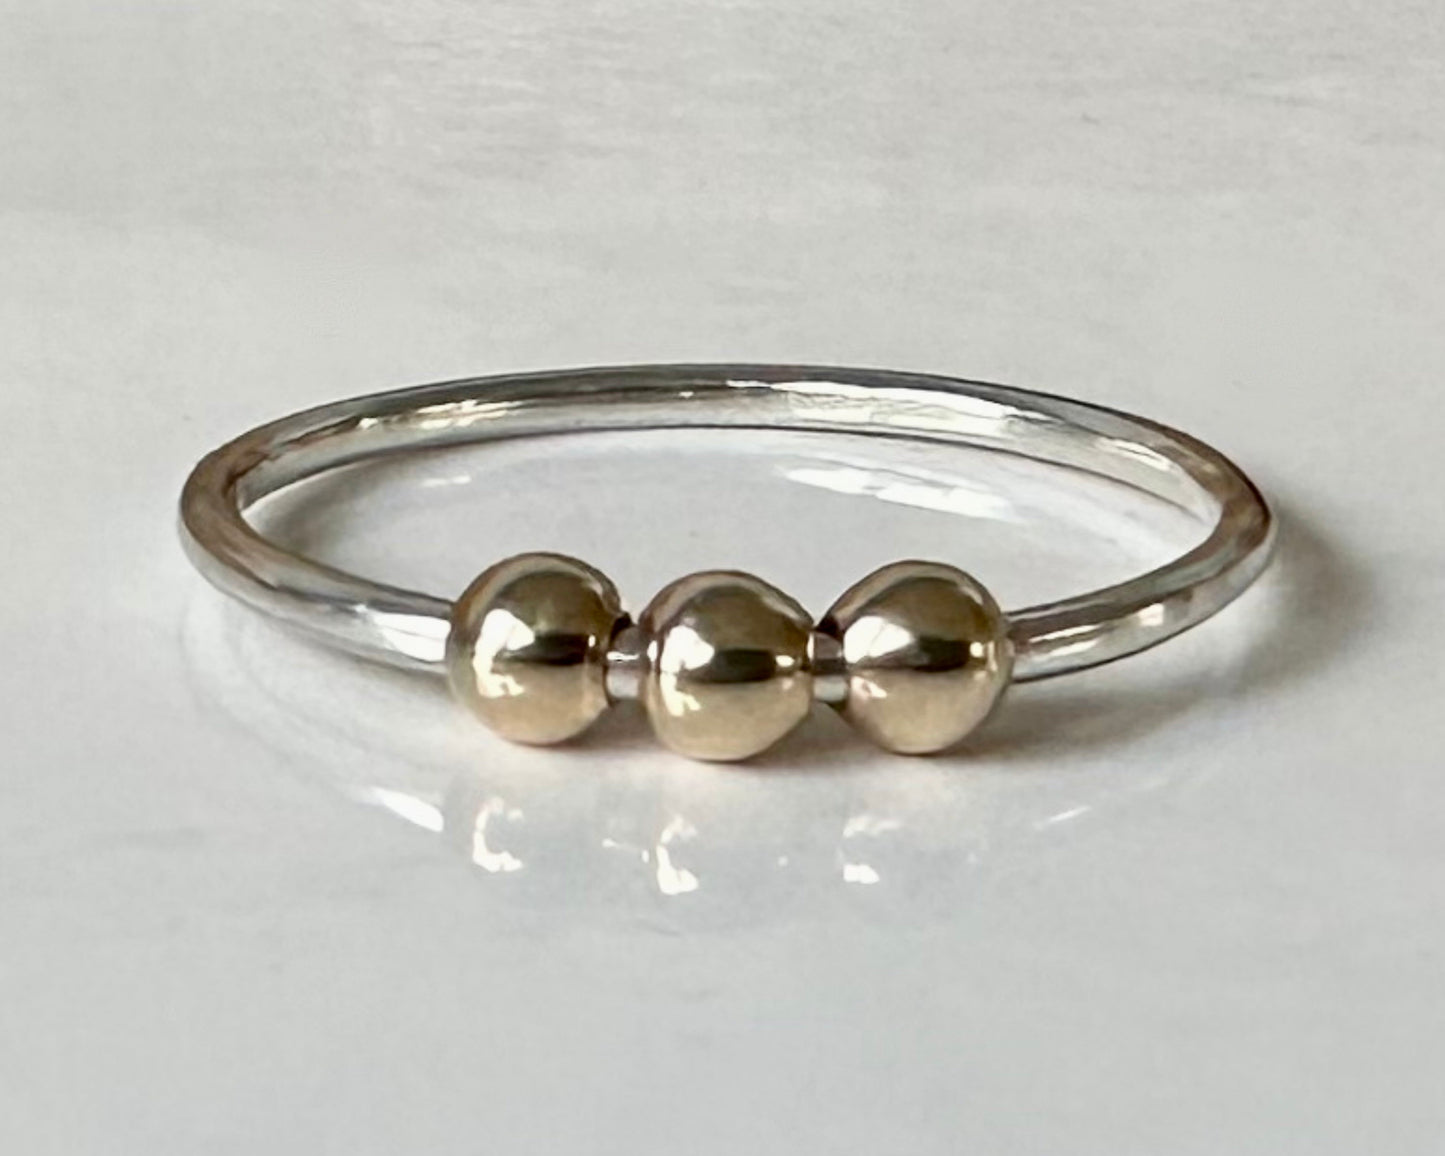 Fidget Ring Handmade from 925 Sterling Silver and 9ct Gold Beads, Gold and Silver Stackable Ring Band, Anxiety Ring, Spinner Ring